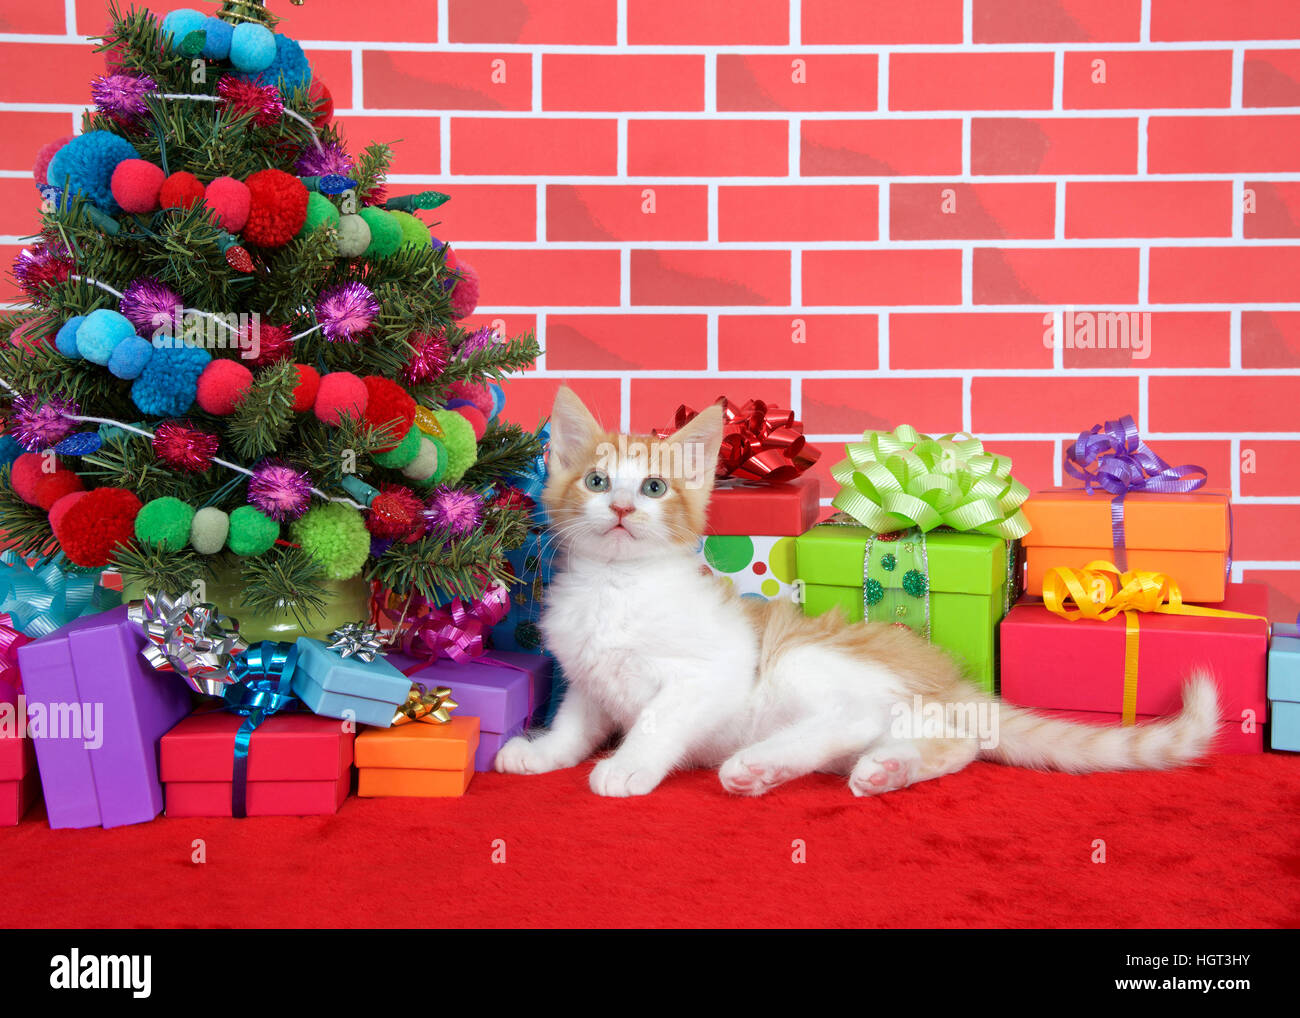 Orange white tabby kitten looking at up, laying on red fur carpet by christmas tree, decorated with yarn balls lights, presents Stock Photo